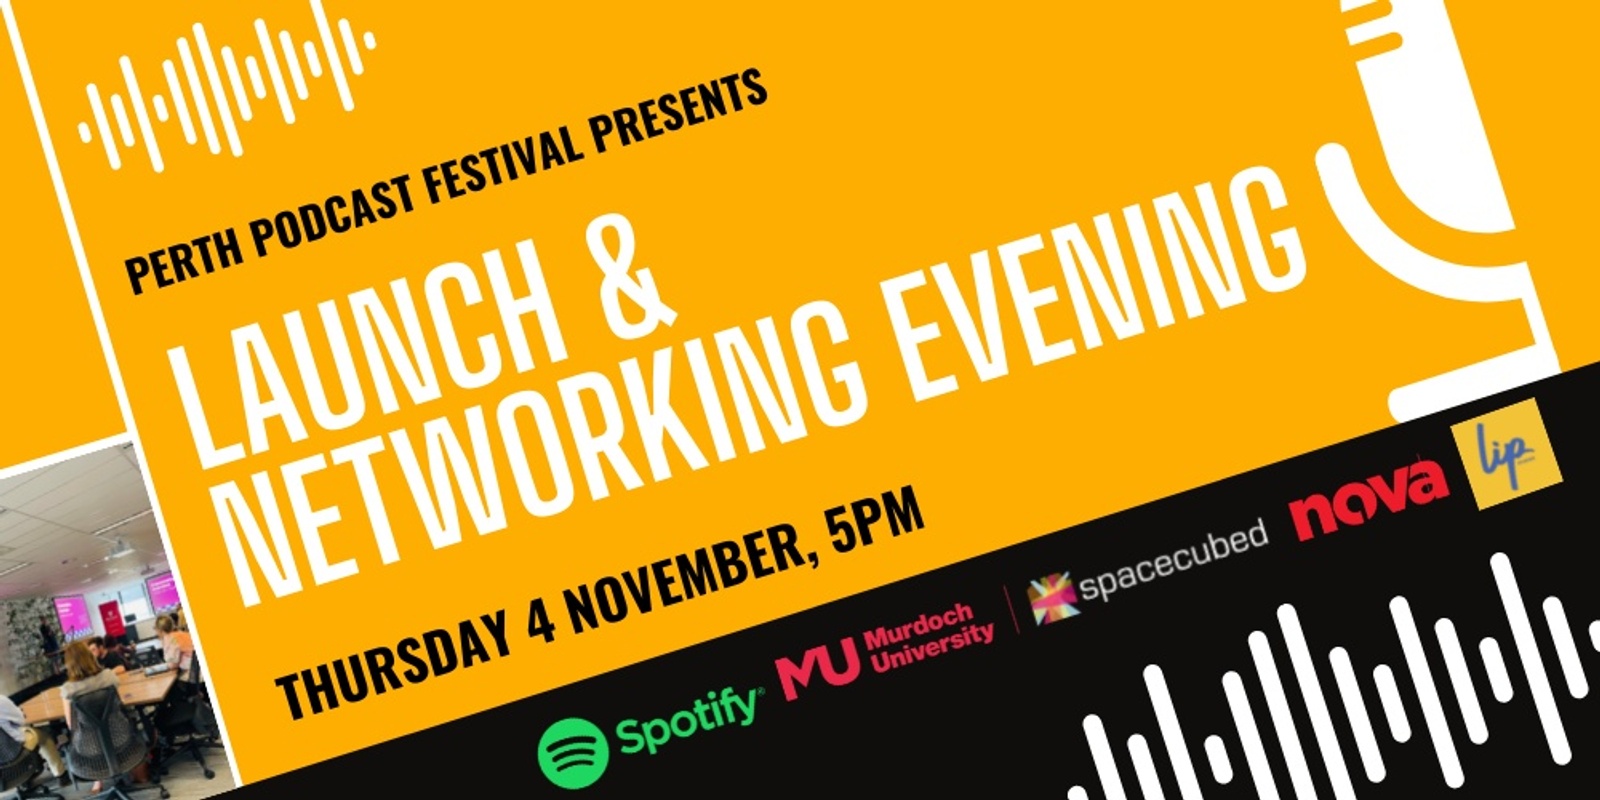 Banner image for Perth Podcast Festival 2021 Launch & Networking Evening